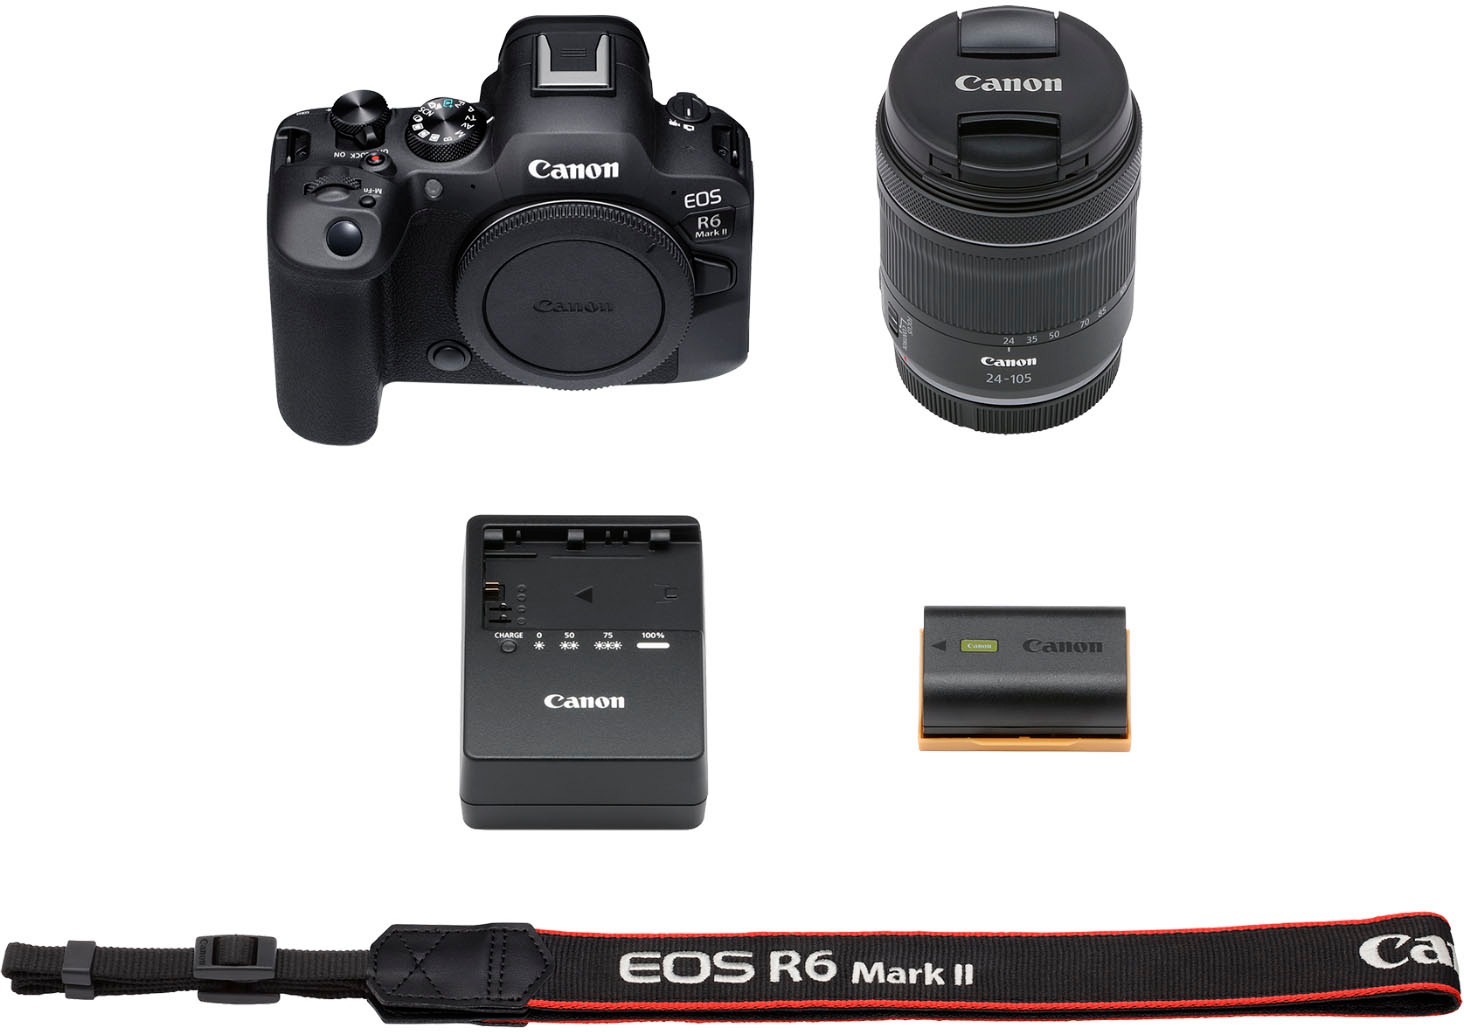 Canon EOS R6 24-105mm 5666C018 RF Best IS STM Lens II with Black Buy Mirrorless - Mark Camera f/4-7.1